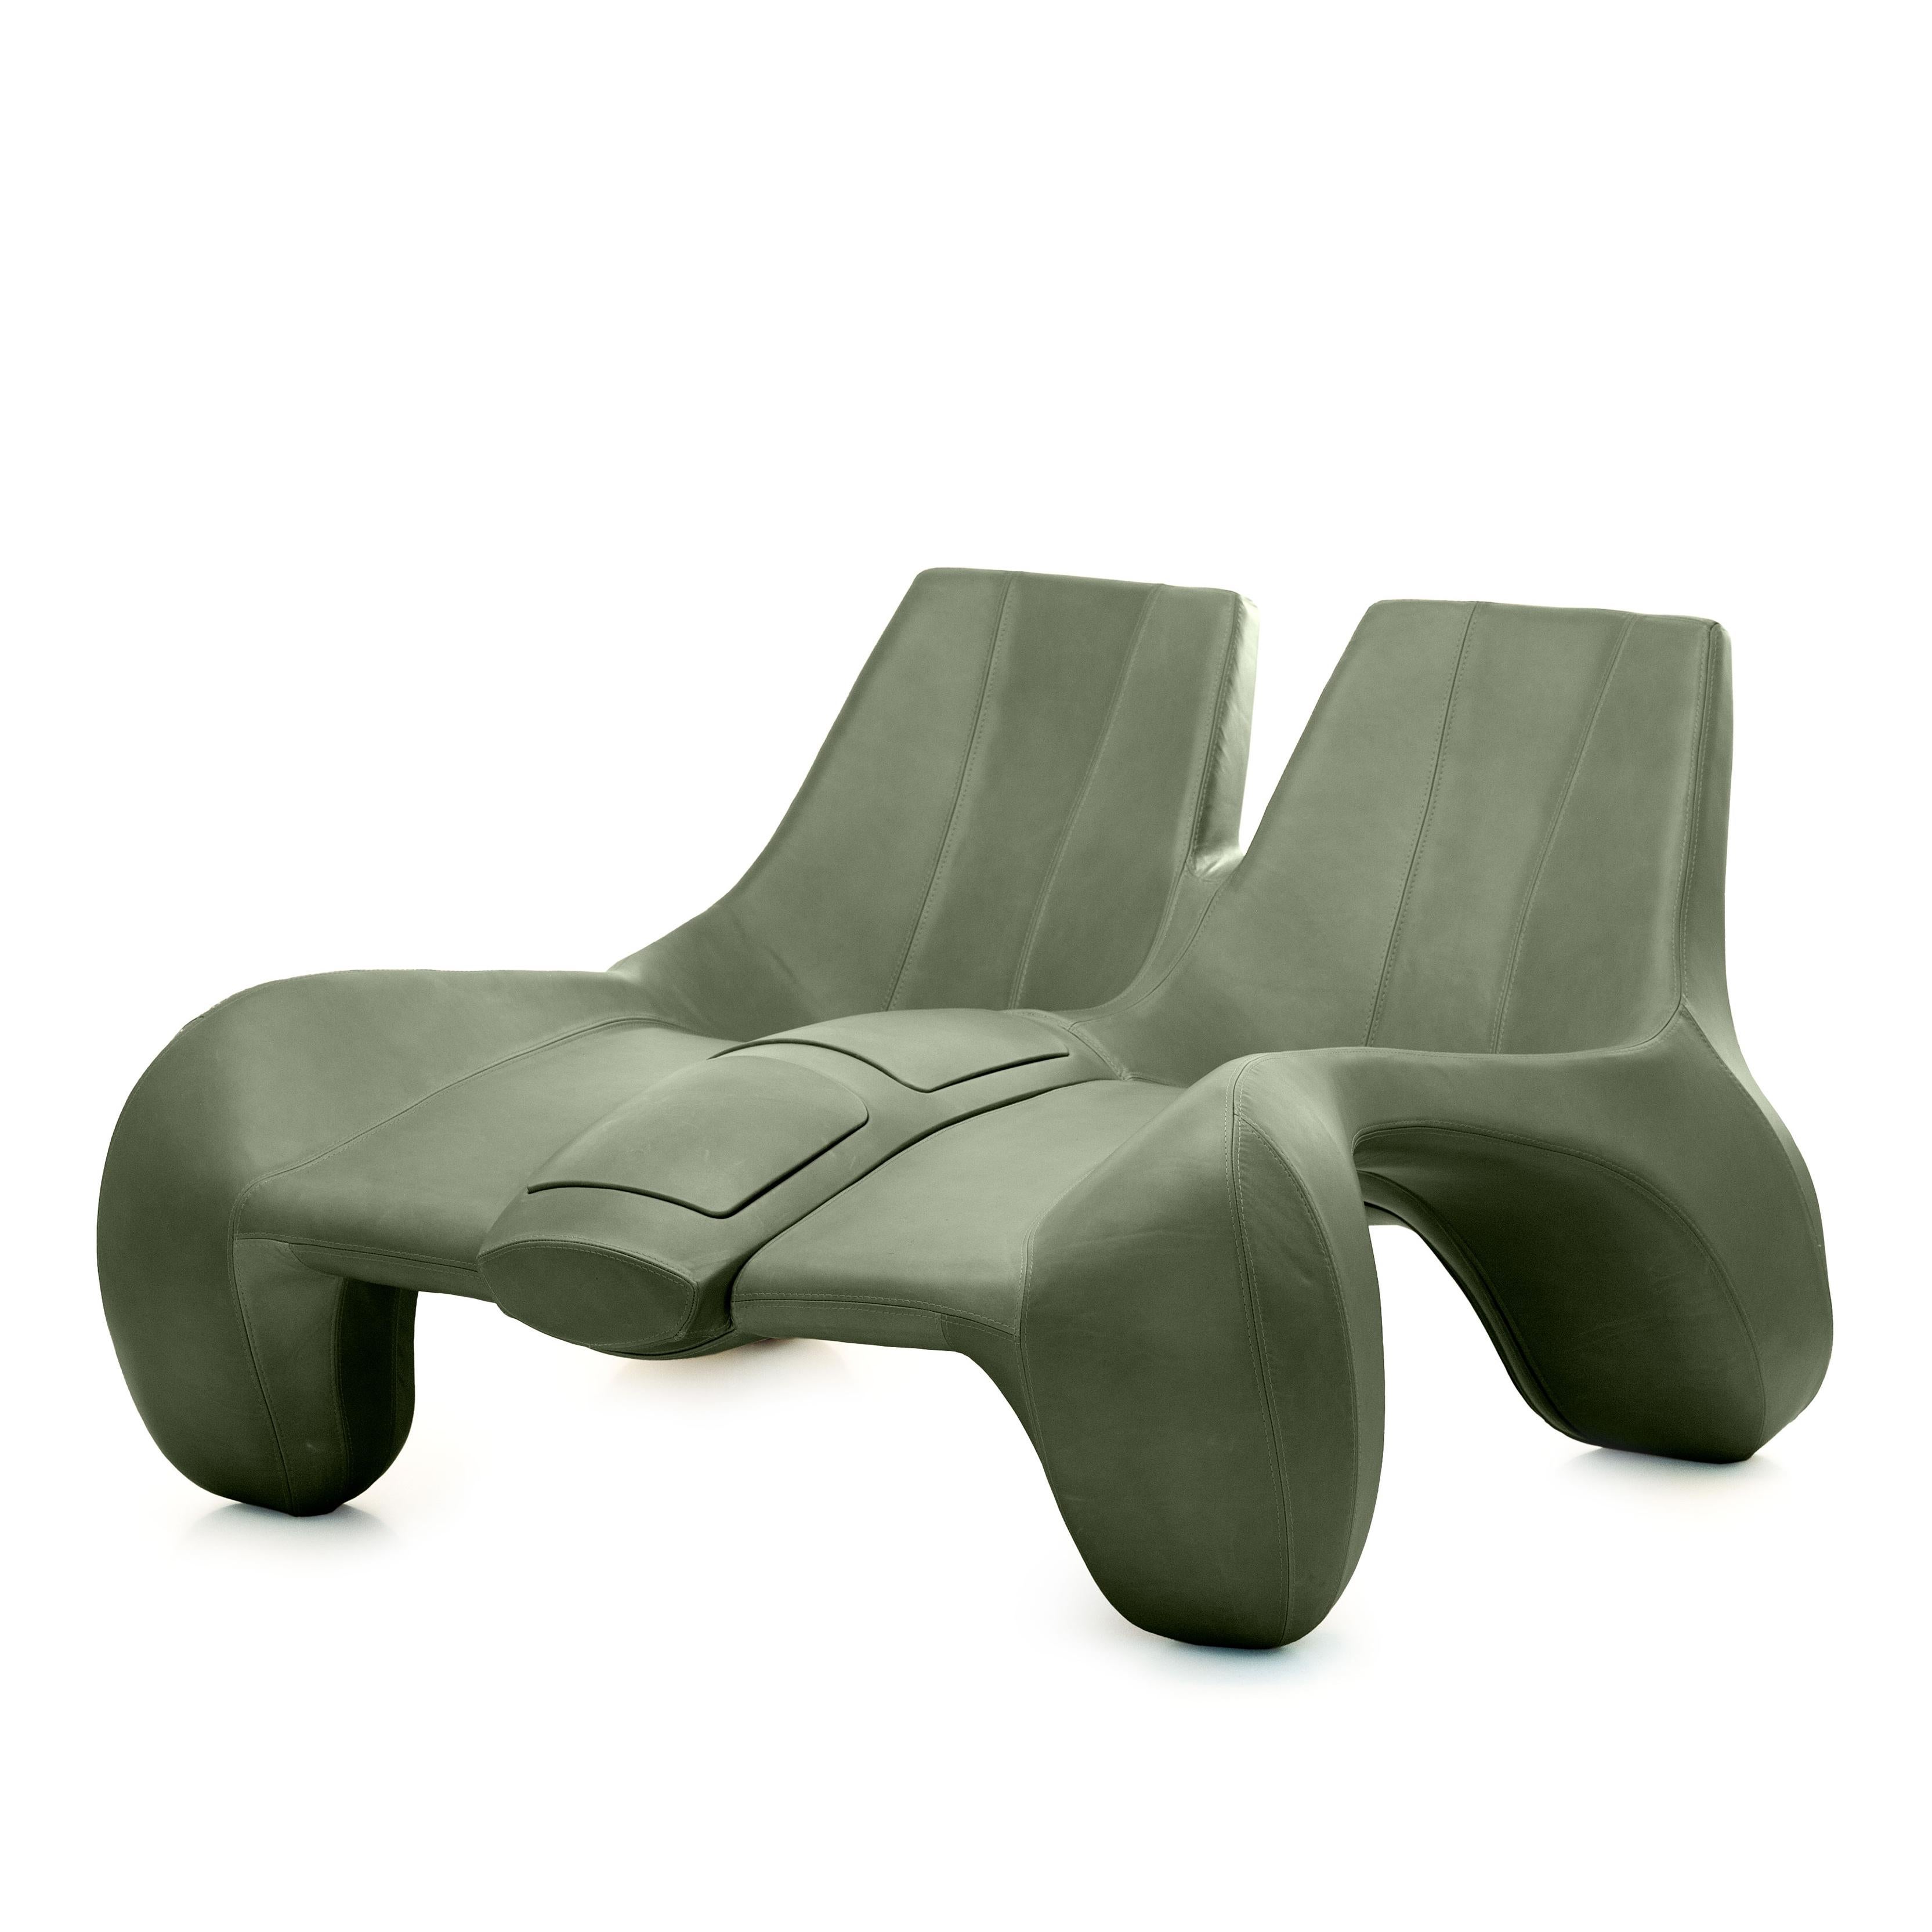 European Double Chaise Longue couch “DC 114” in Pure Aniline Leather, Colour Forest Green For Sale